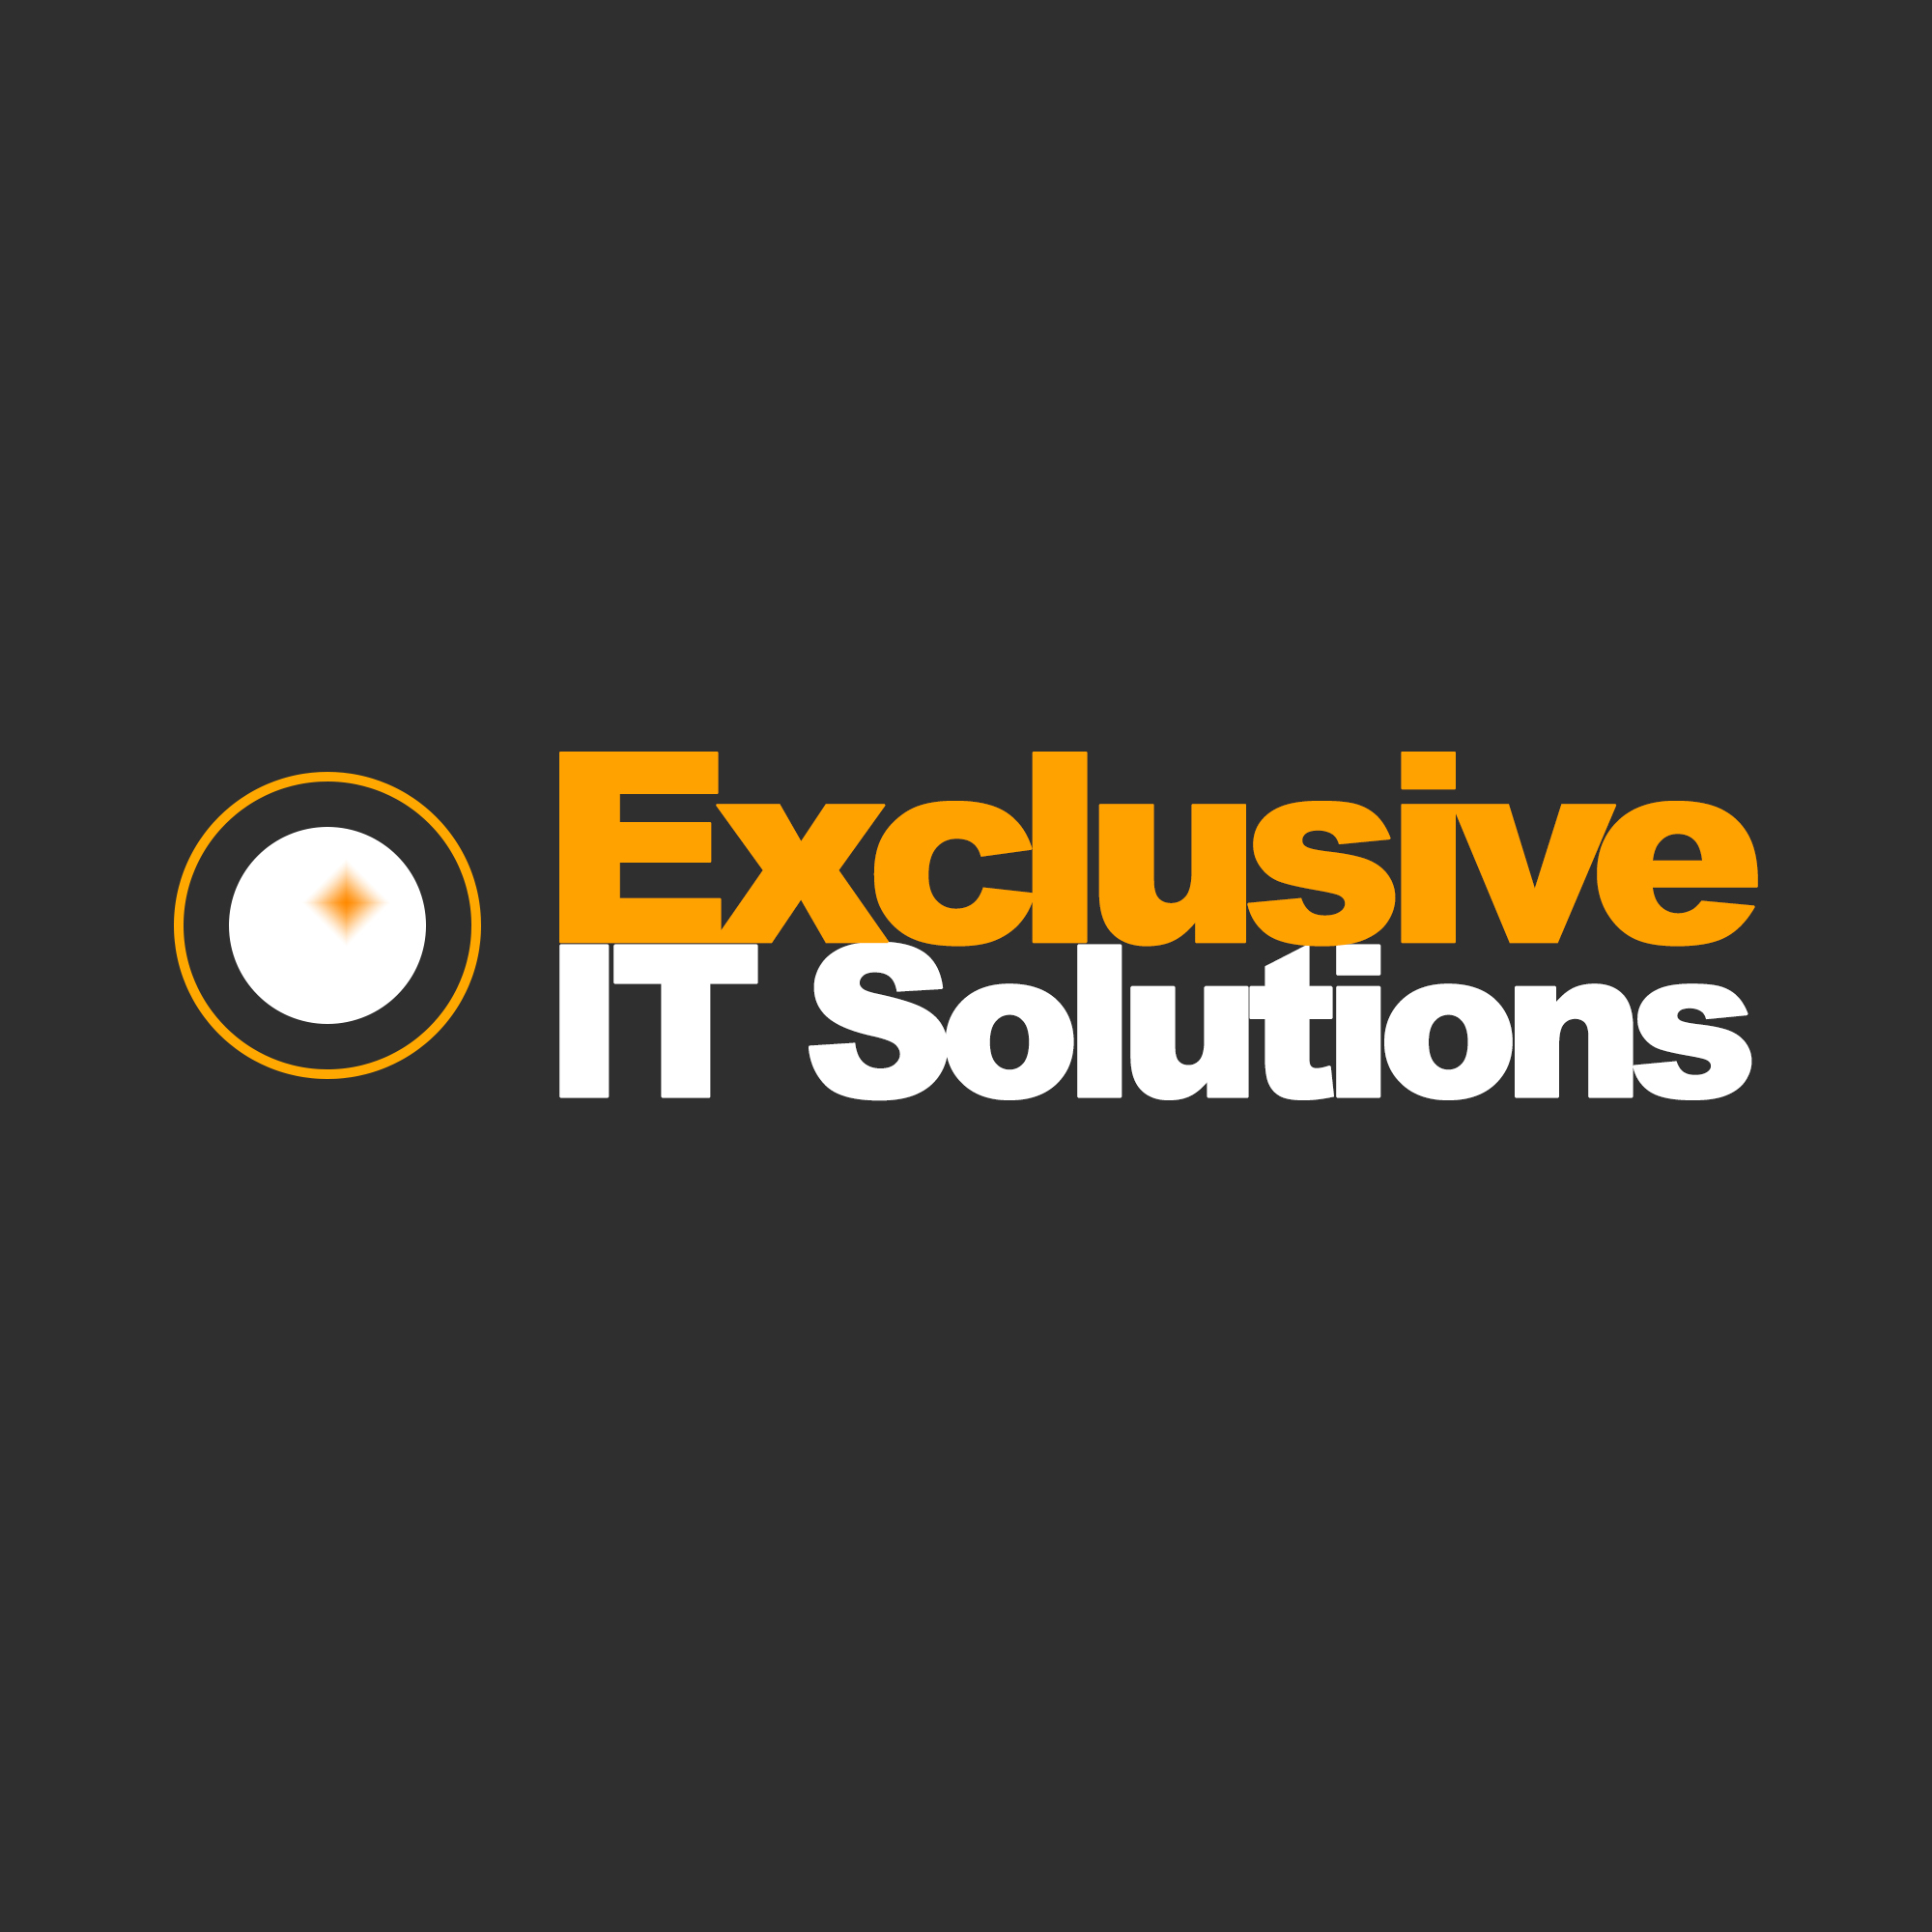 Exclusive IT Solutions Square Logo